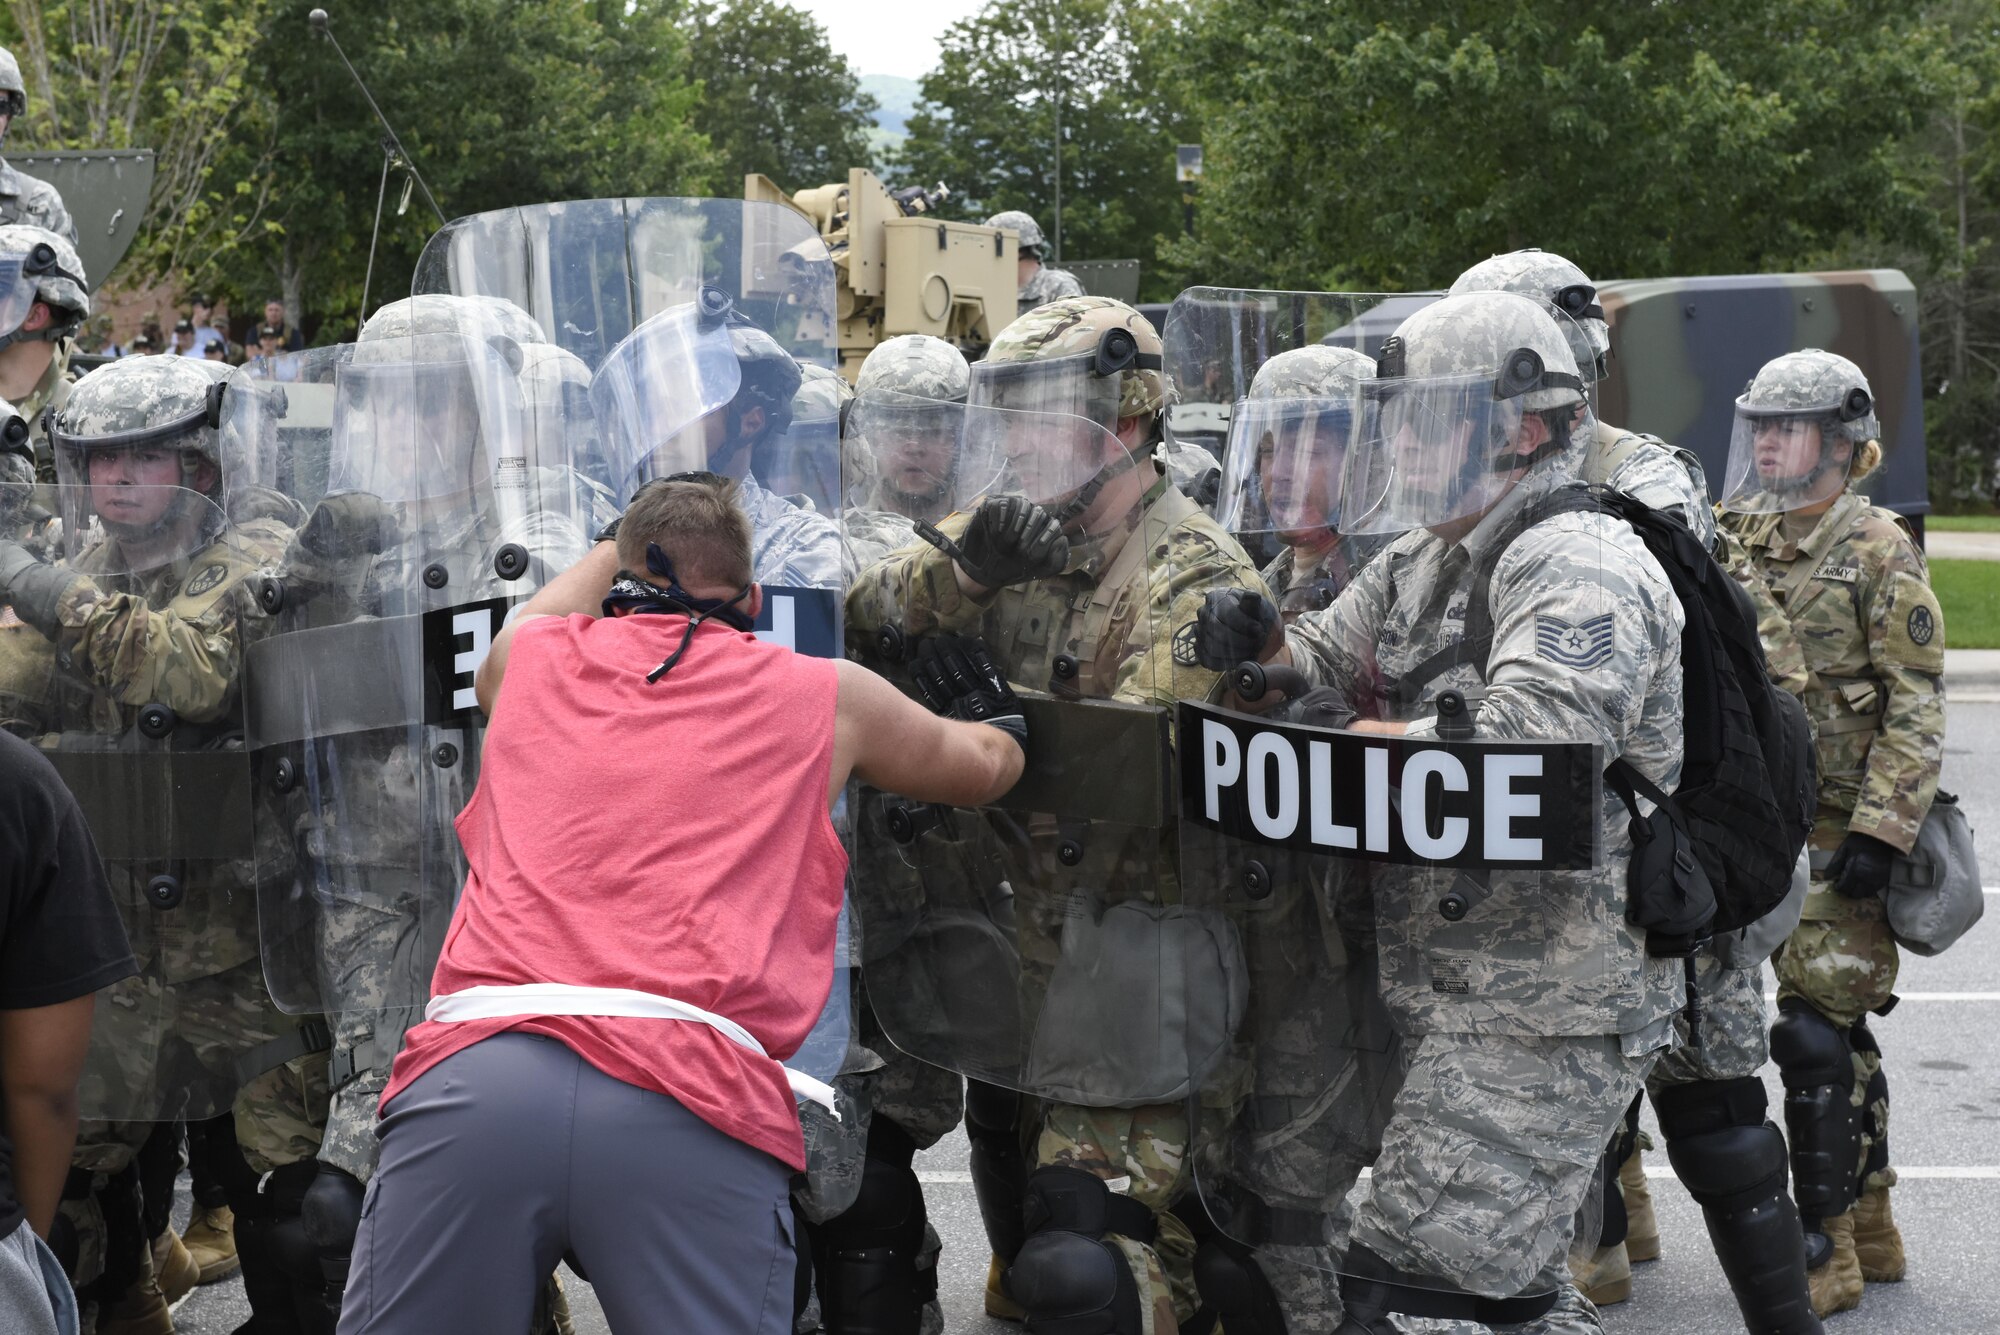 U.S. Air Force Tech. Sgt. Shane Johnson (right) holds back mock protestors at a simulated riot for Vigilant Catamount at Western Carolina University, Cullowhee North Carolina, June 13, 2017. Vigilant Catamount is a mulitday, multi-agency training exercise ending with simulated riot at Western Carolina University, involving Army National Guard Military police and the 145th Airlift Wing Security Forces.